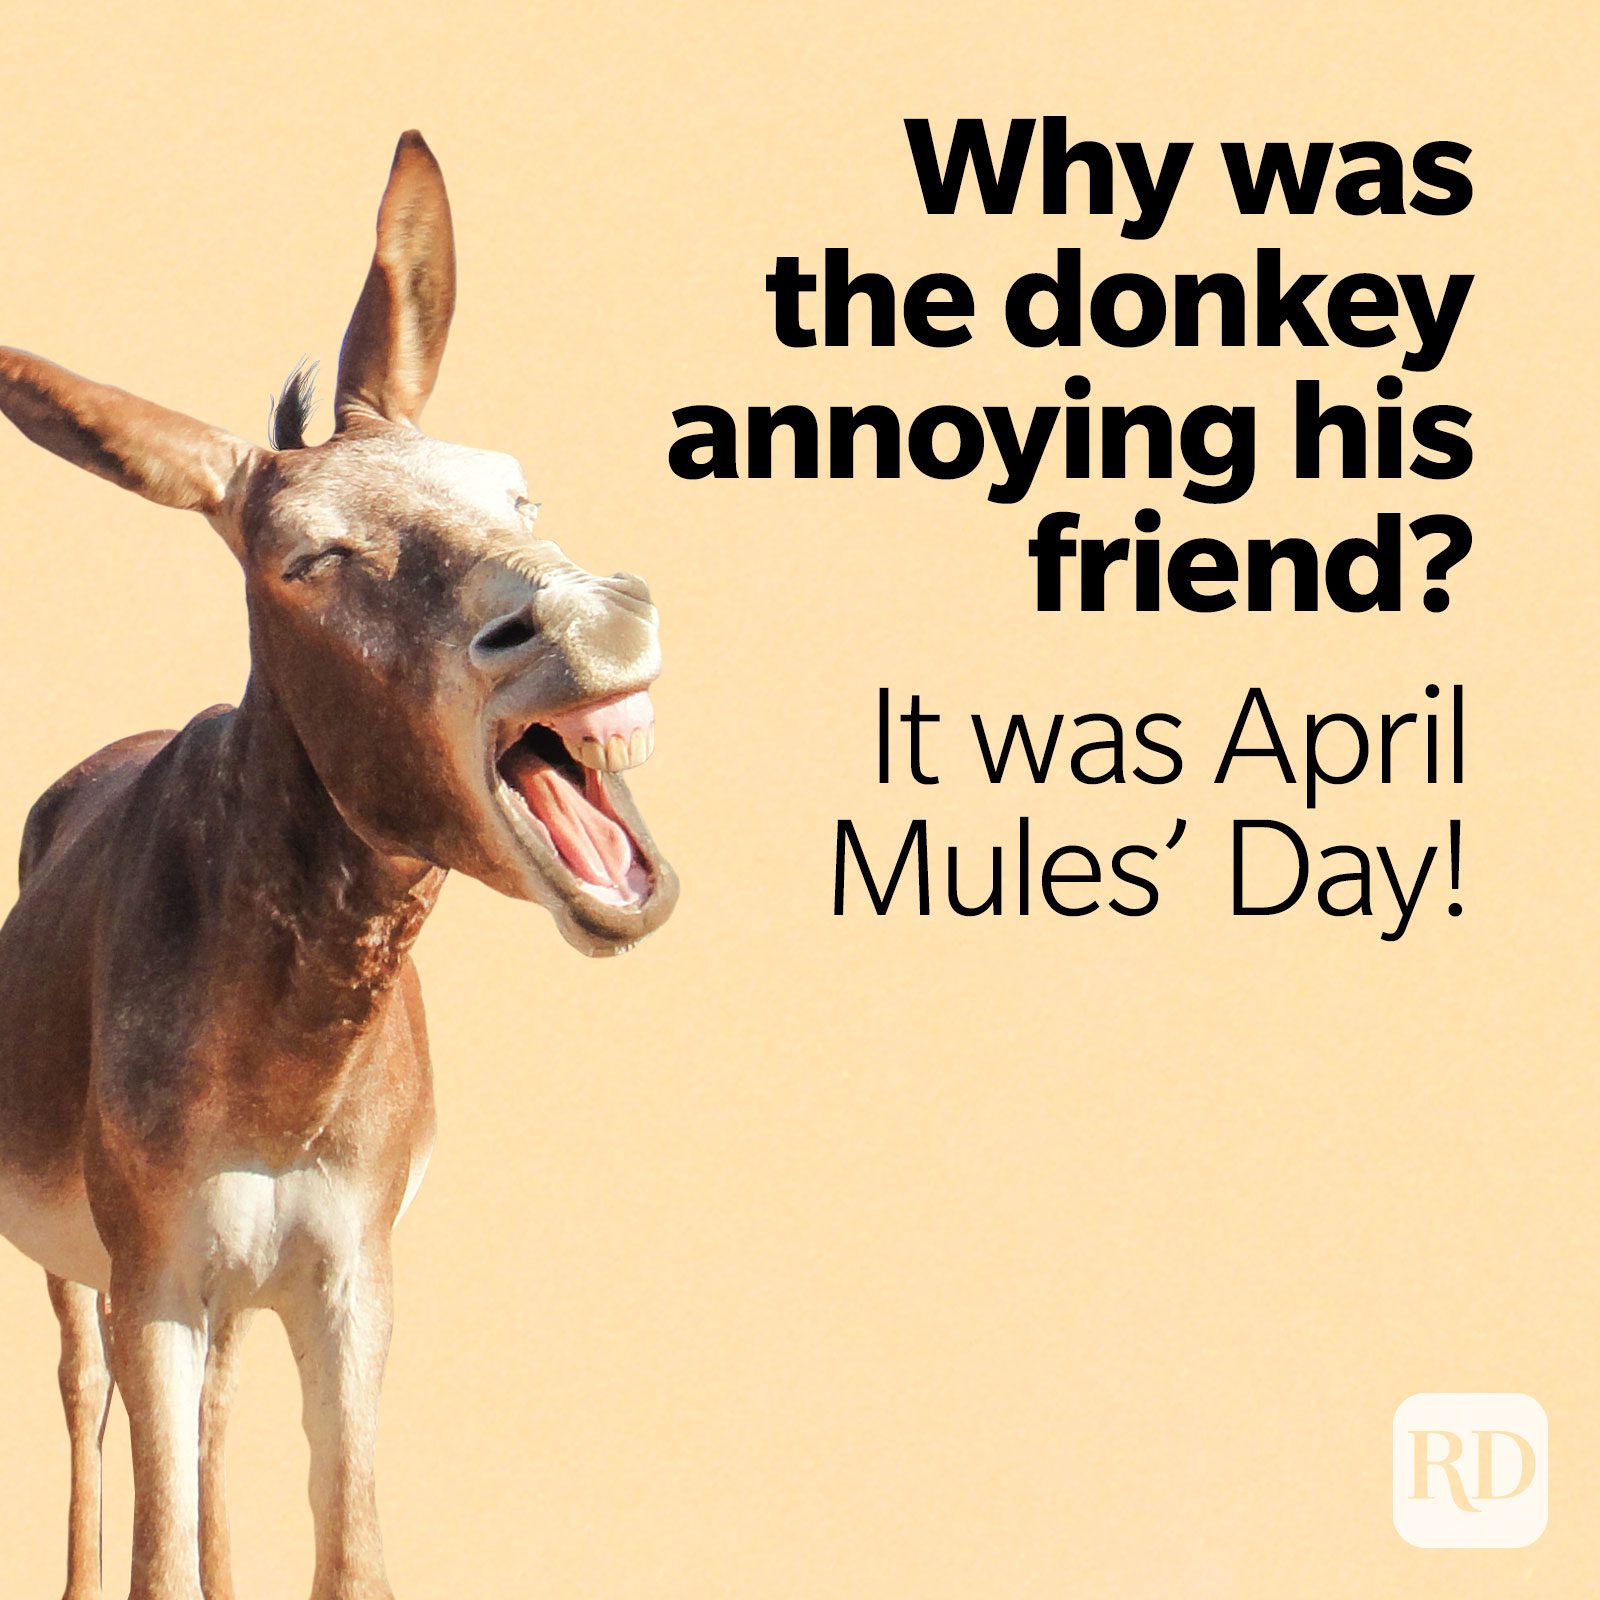 Image of donkey with text: Why was the donkey annoying his friend? It was April Mules' Day!